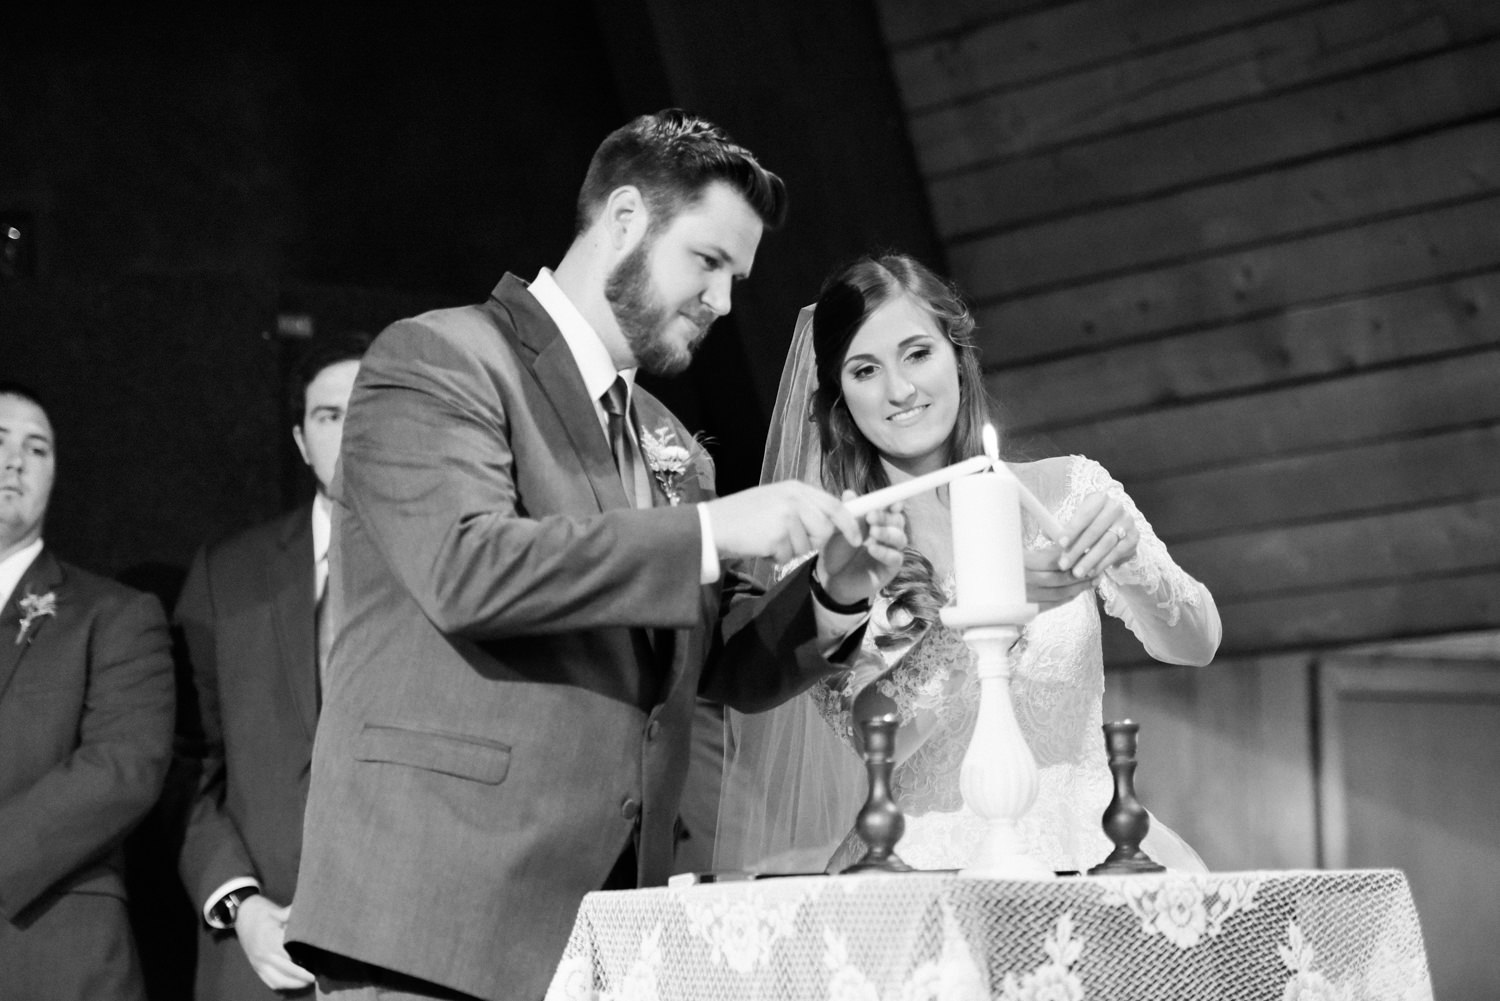 Bride and groom lighting unity candle; black and white